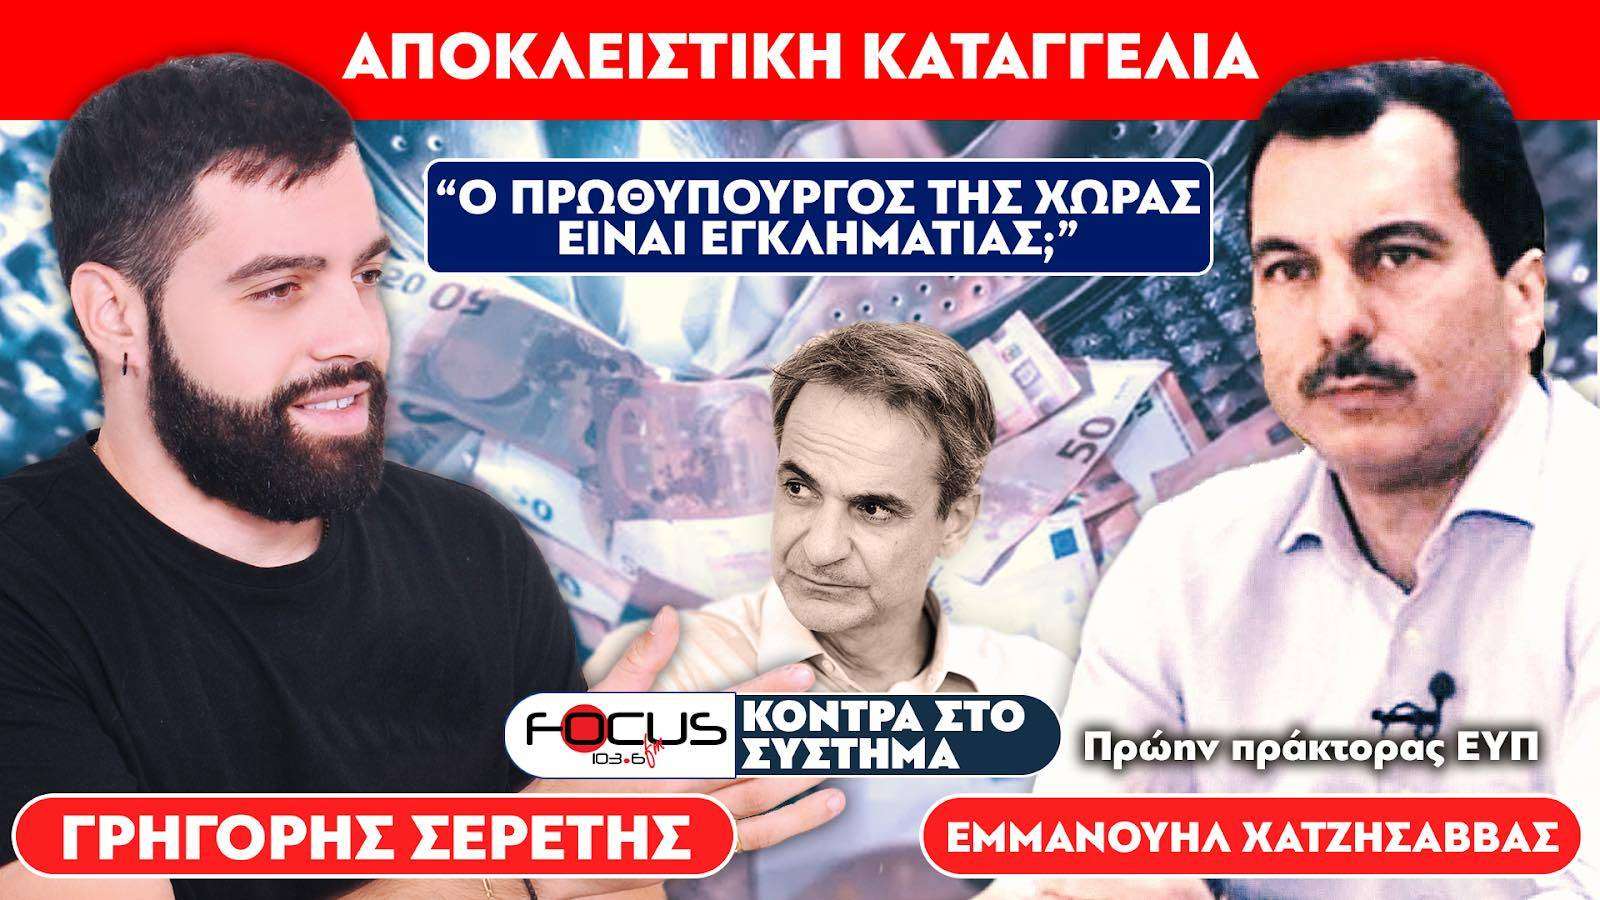 Seretis Grigoris: Is the prime minister of the country a criminal? Emmanouil Hatzisavvas says Yes